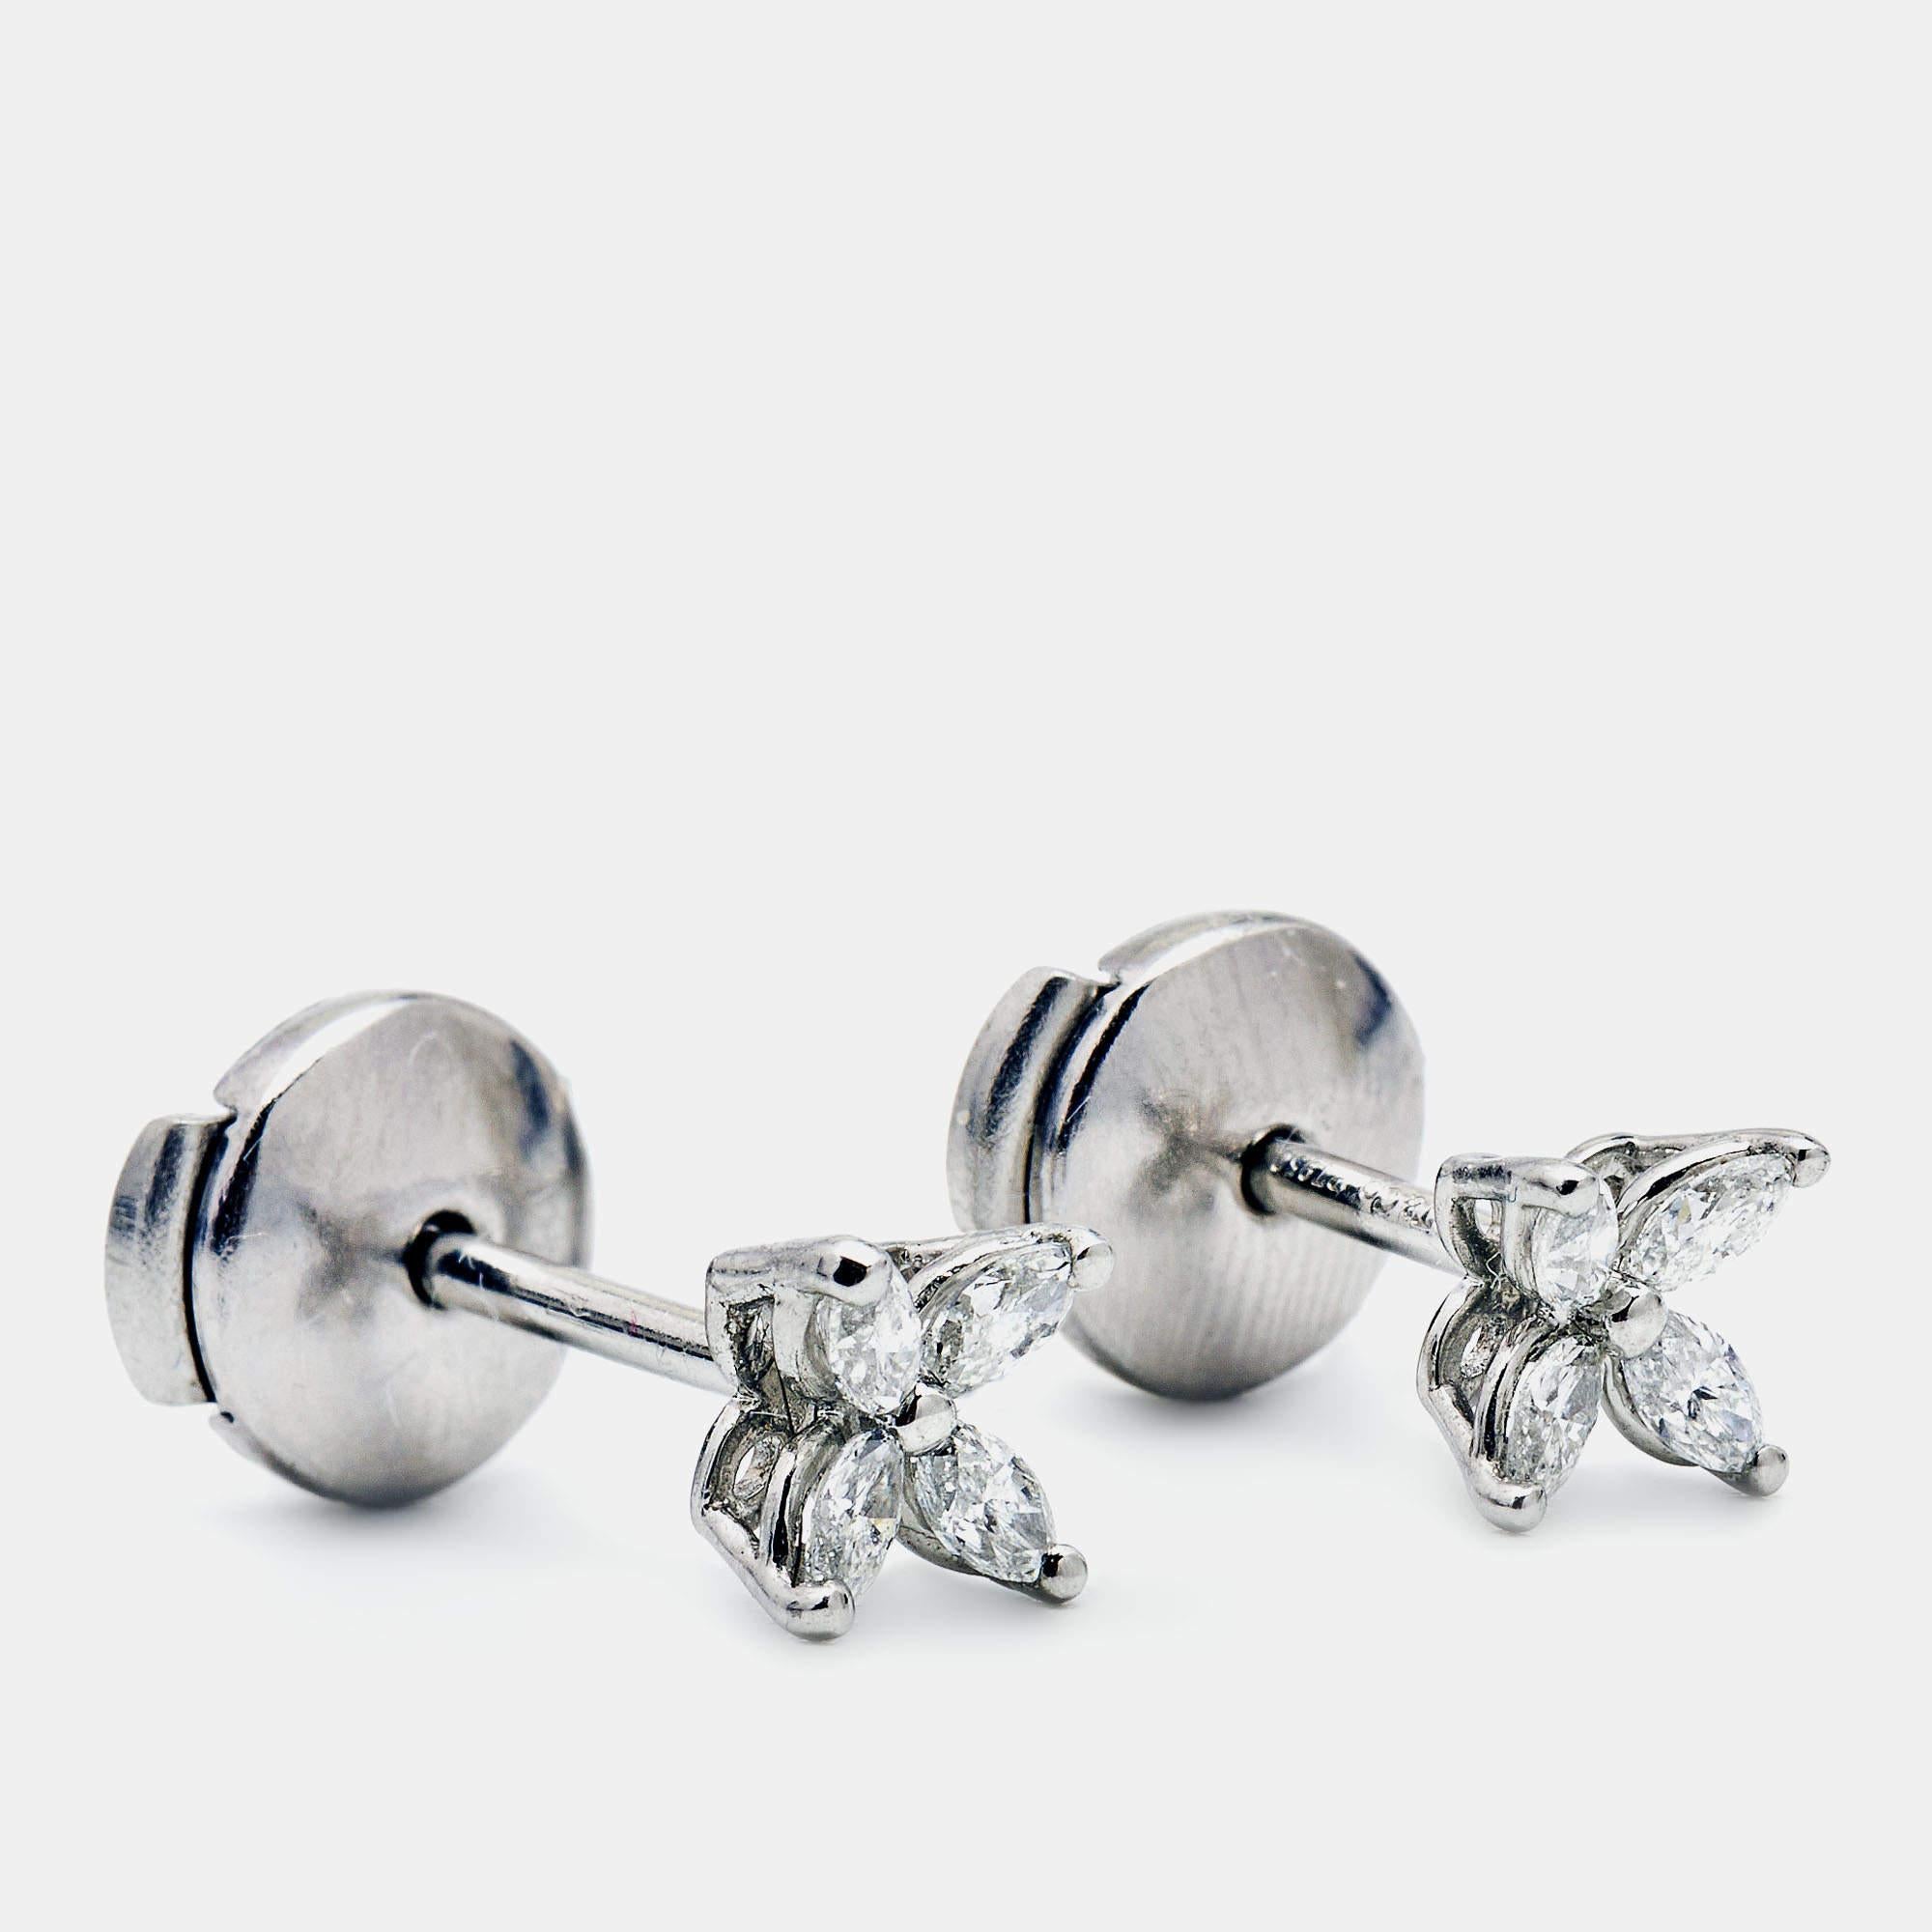 The Tiffany & Co. Tiffany Victoria earrings are exquisite and timeless pieces of jewelry. Crafted in lustrous platinum, these stud earrings feature a cluster of dazzling diamonds in the iconic Victoria design, creating a sparkling and elegant look.